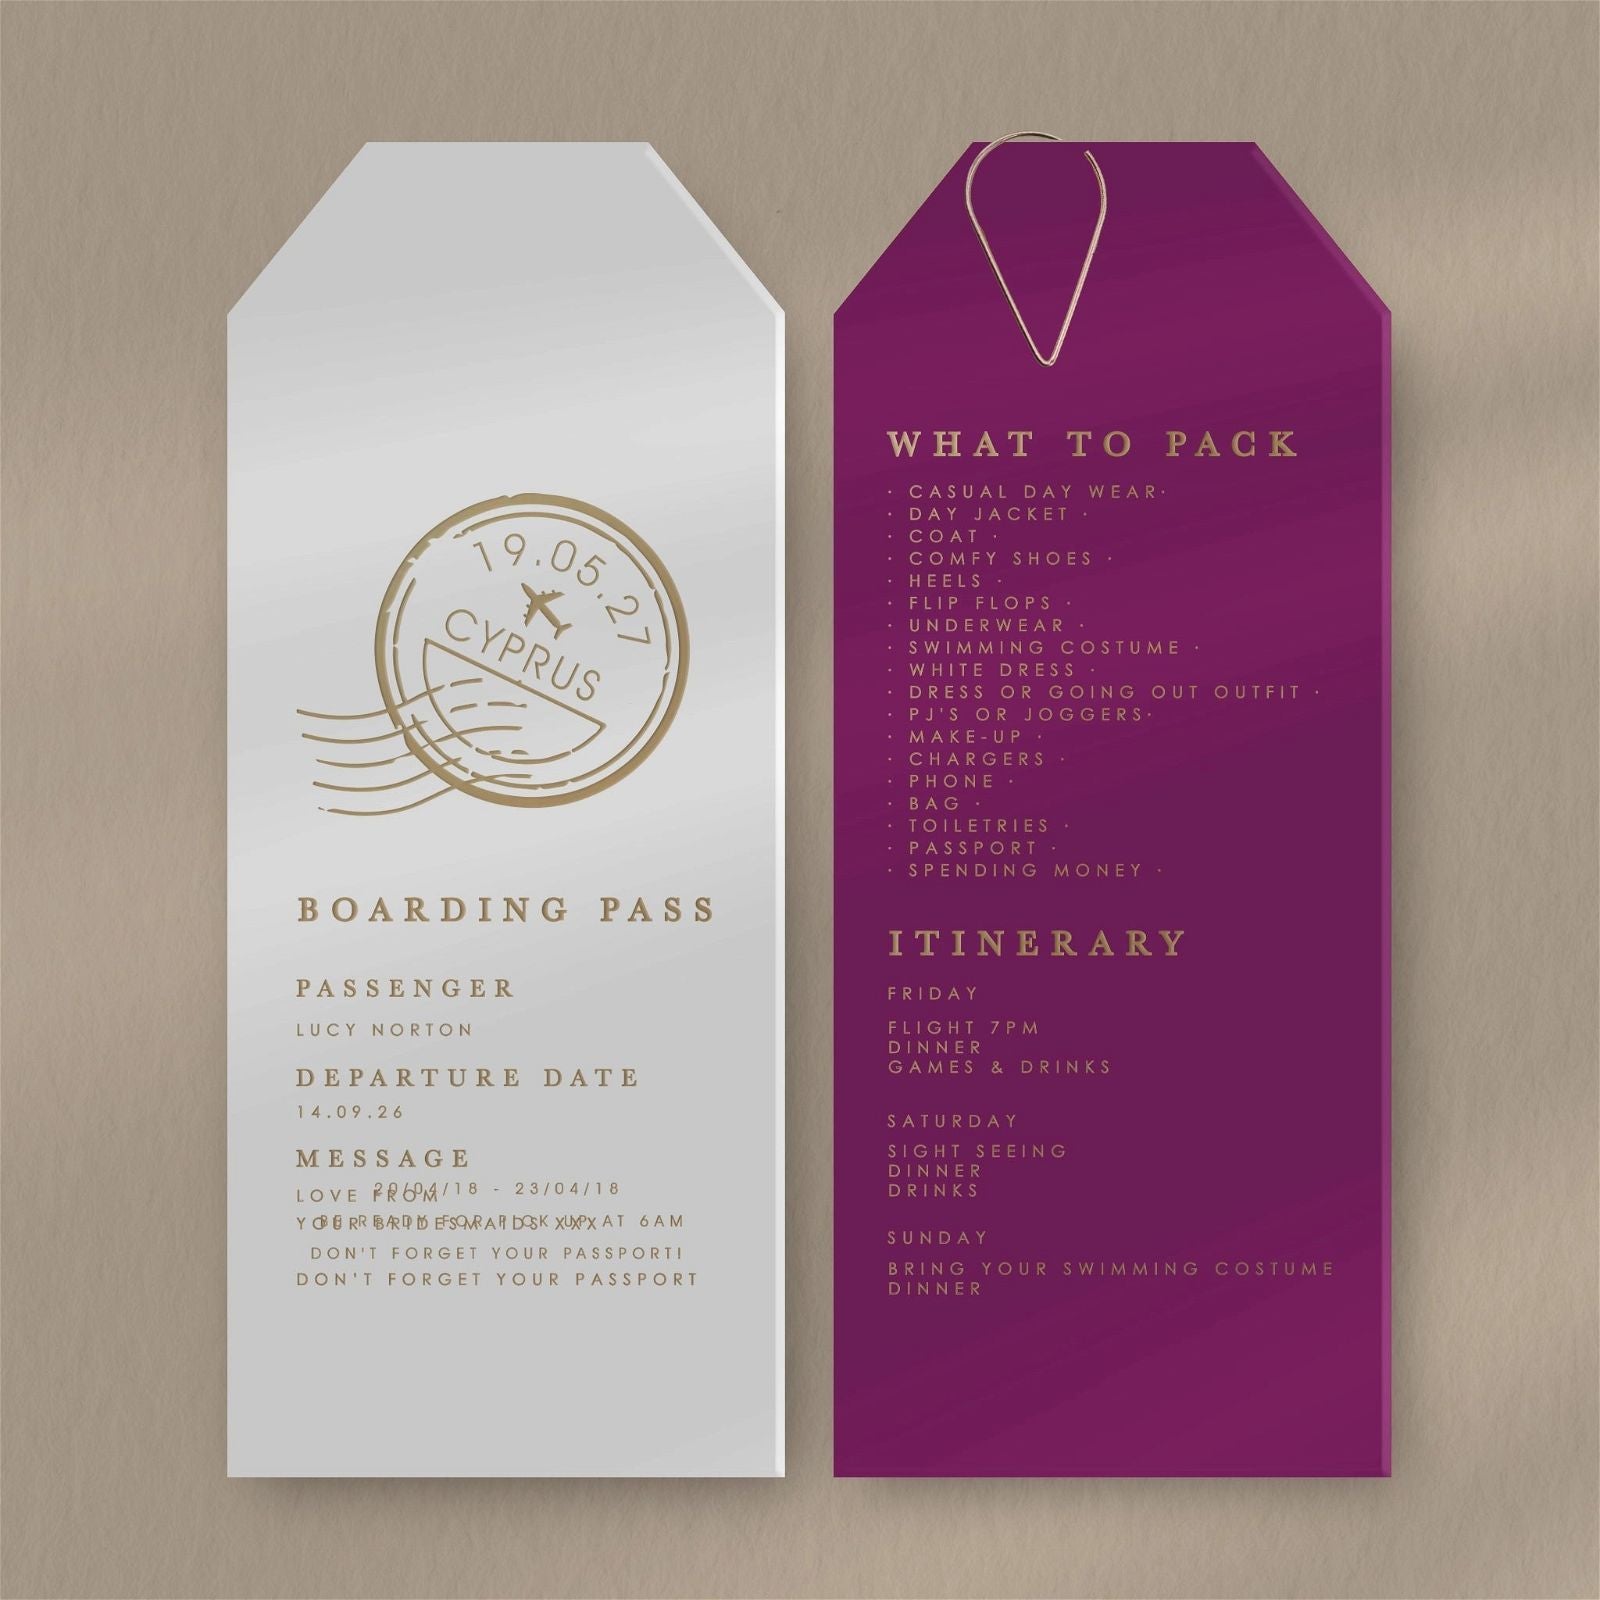 Hen Travel Itinerary Invitation  Ivy and Gold Wedding Stationery   